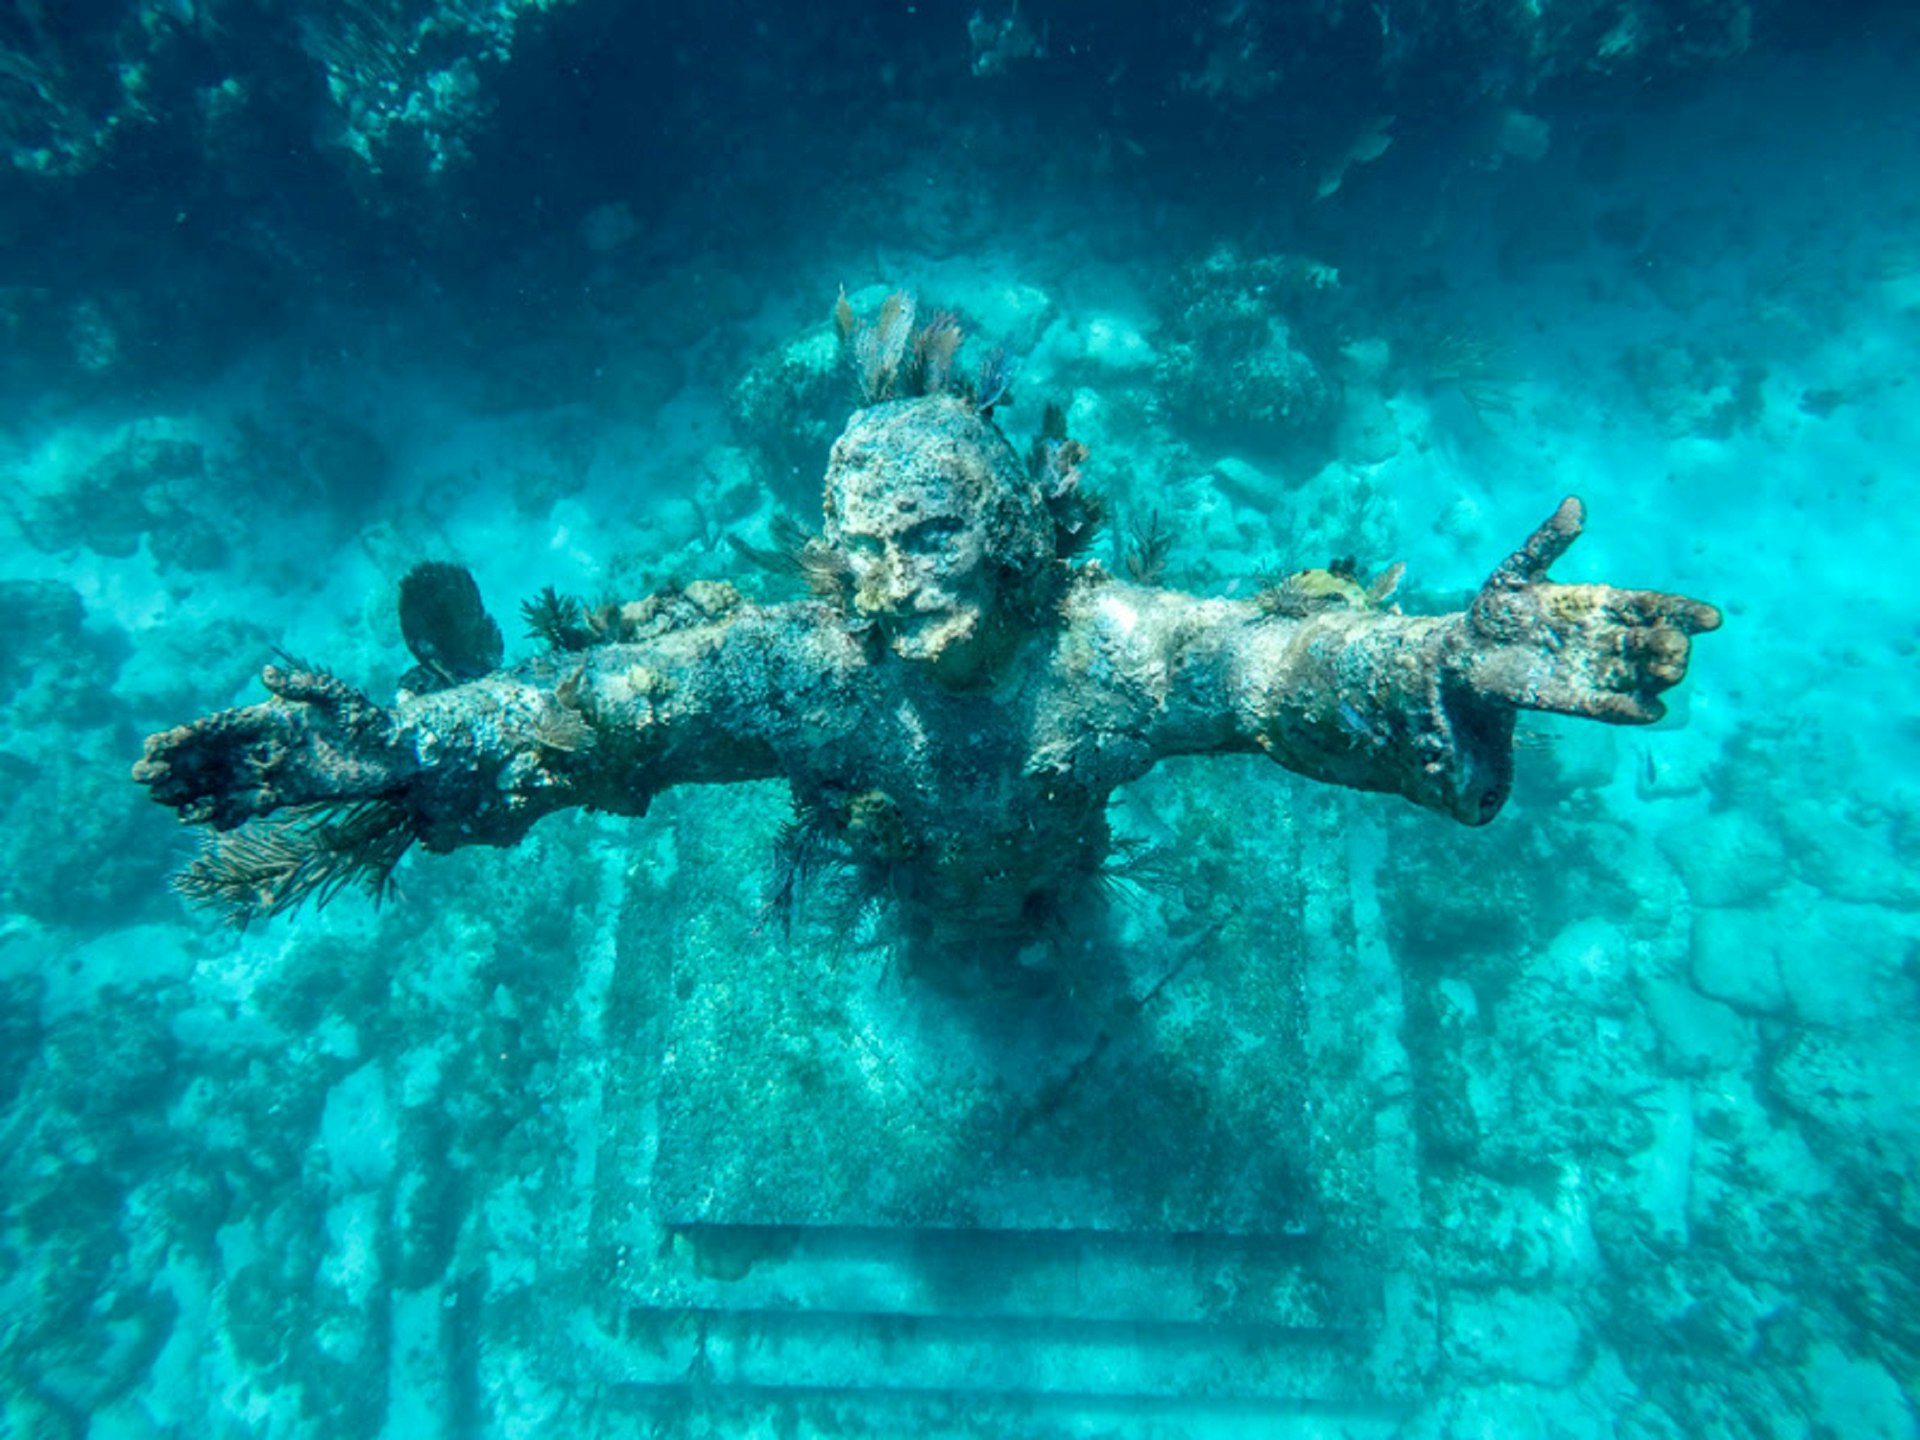 An underwater statue of a man with his arms raised towards the camera